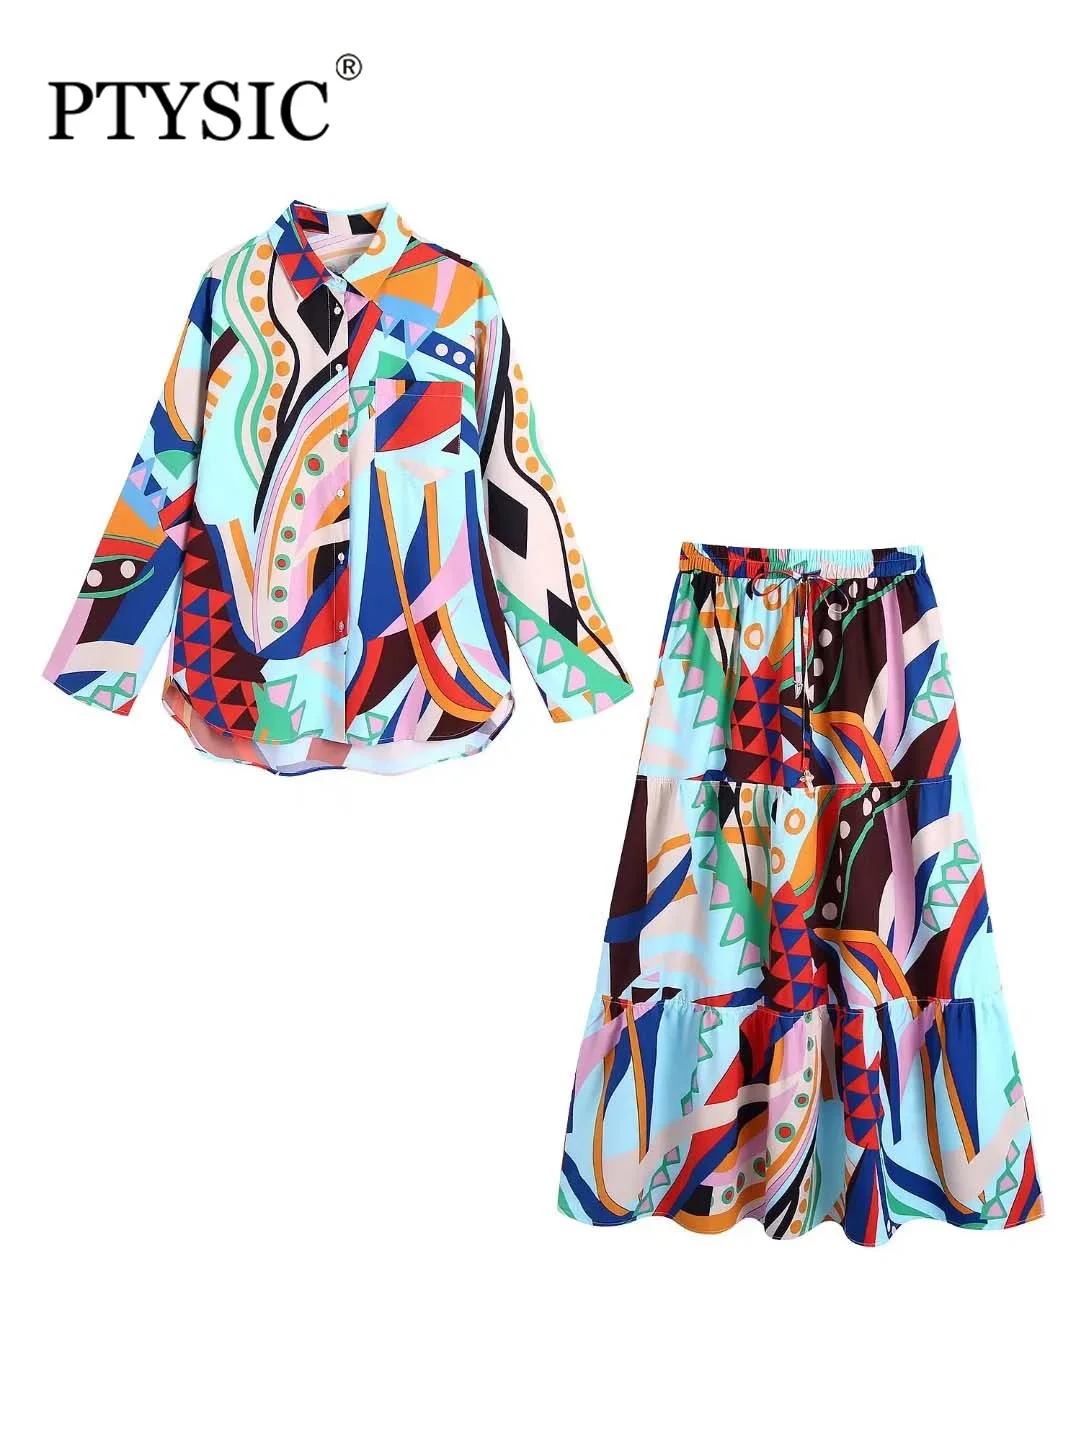 

PTYSIC Women Fashion Print Asymmetrical Full Sleeve Shirts Patchwork Jewelry Tied A-LINE Skirts Casual Two Piece Co-Ords Sets